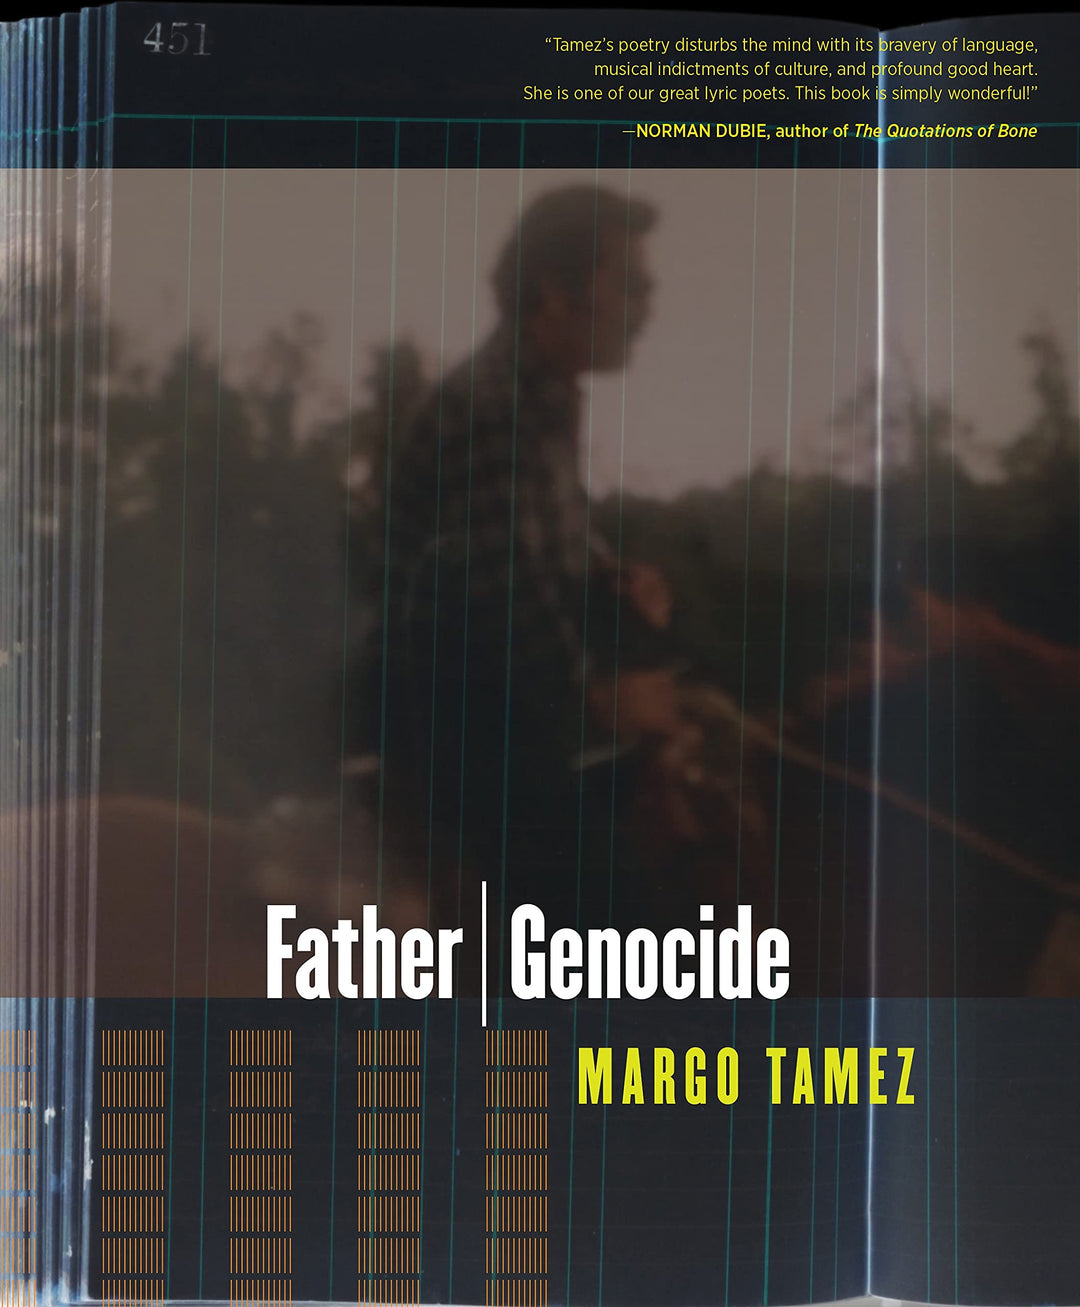 Father | Genocide by Margo Tamez